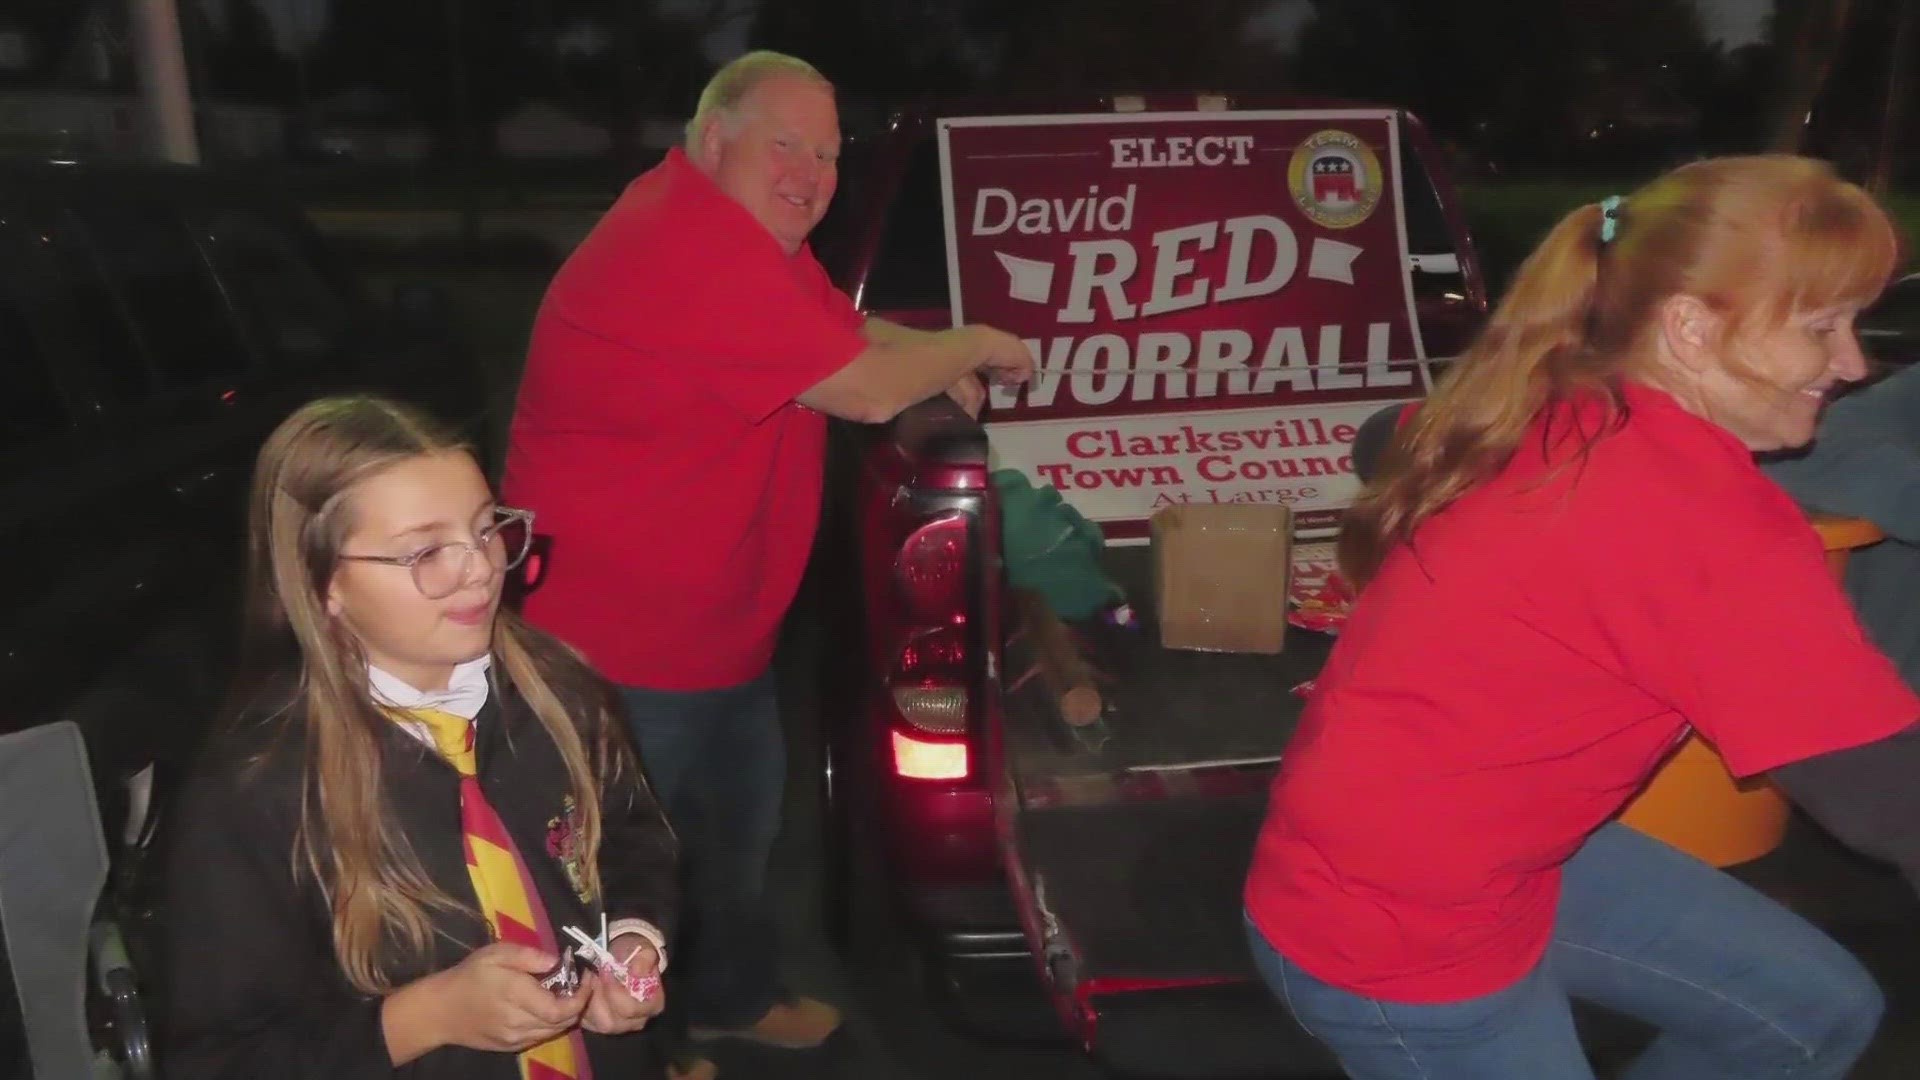 David "Red" Worrall passed away on Election Day after greeting voters at a polling station in Clarksville.